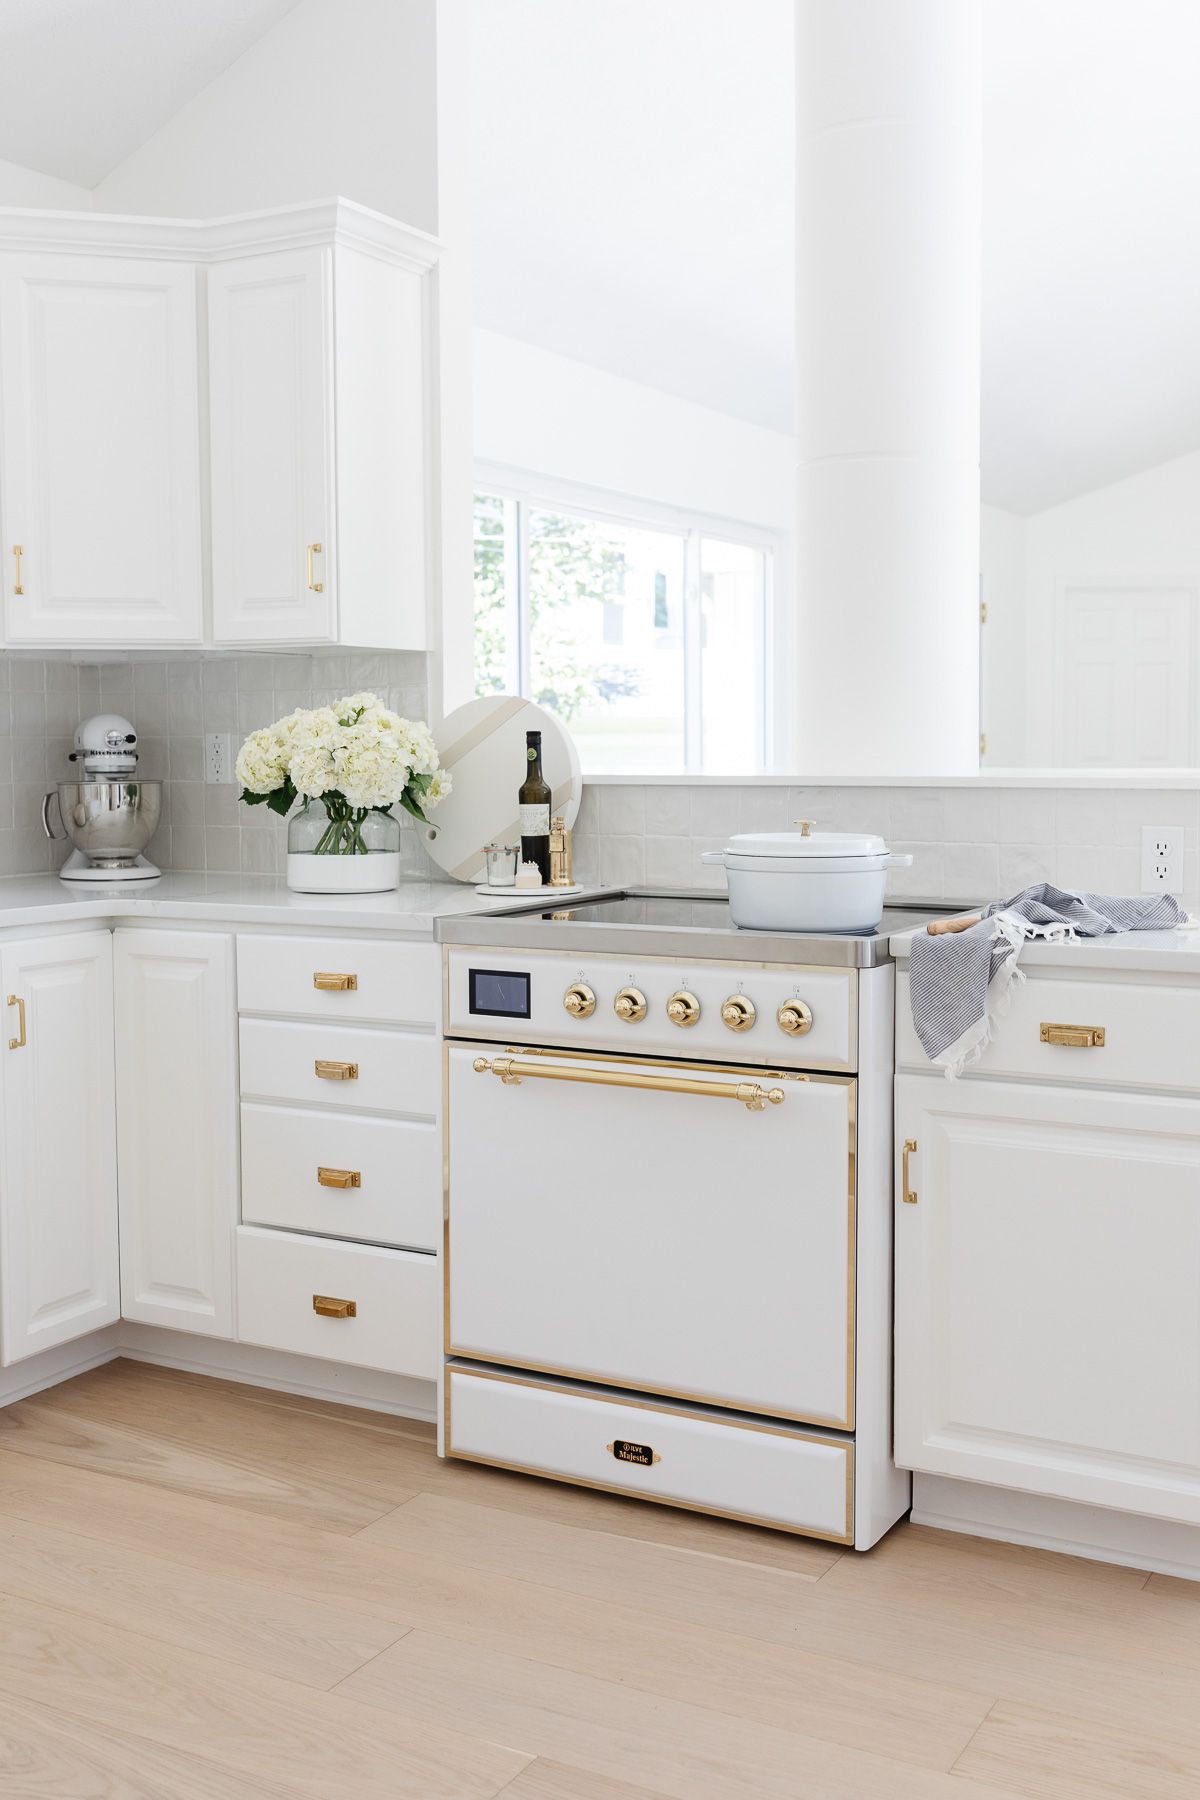 A white kitchen with a white and brass ILVE range, with white oak flooring